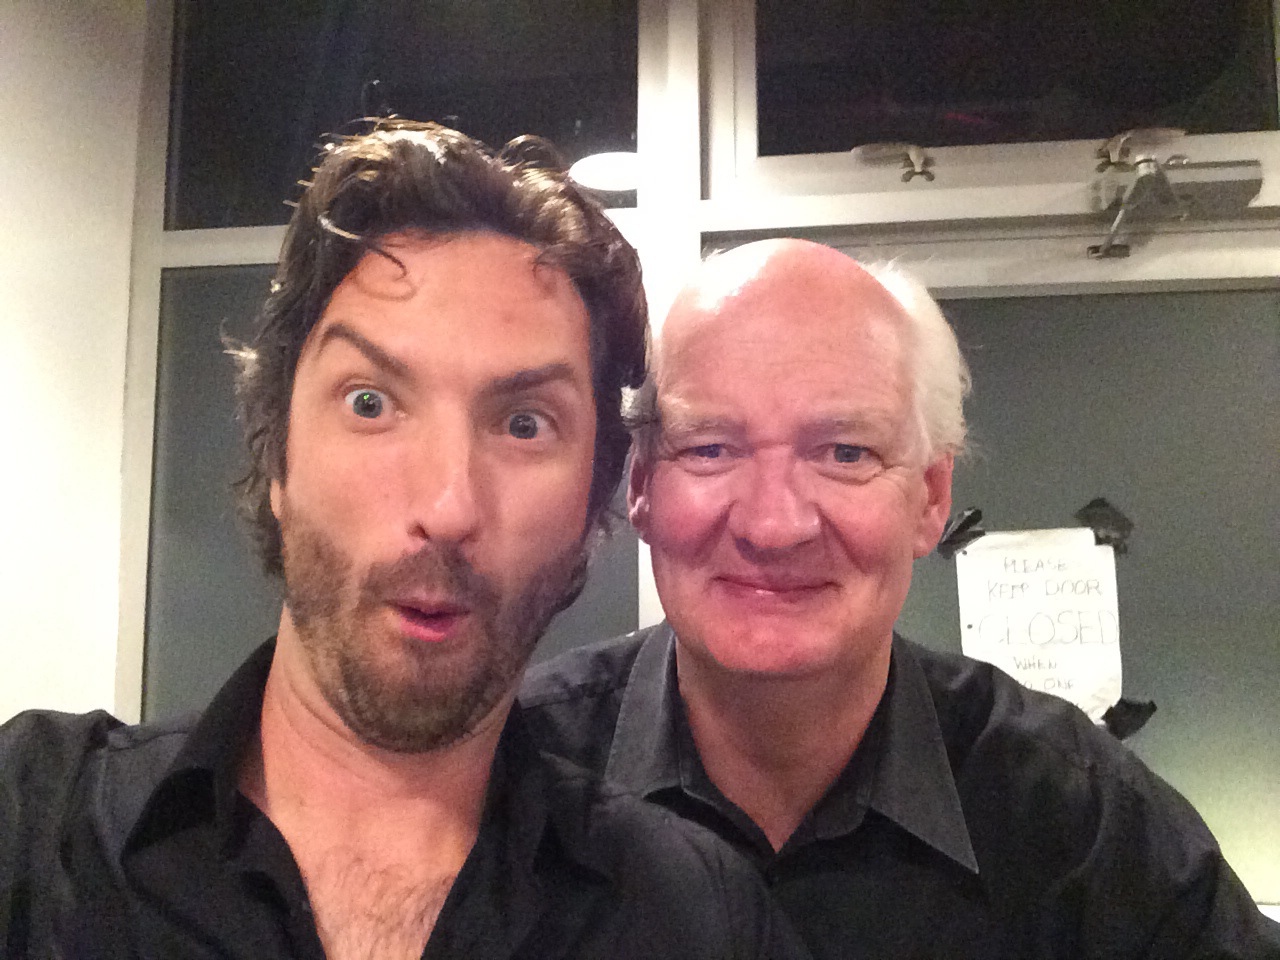 Colin Mocherie! What an honor to improvise with him!